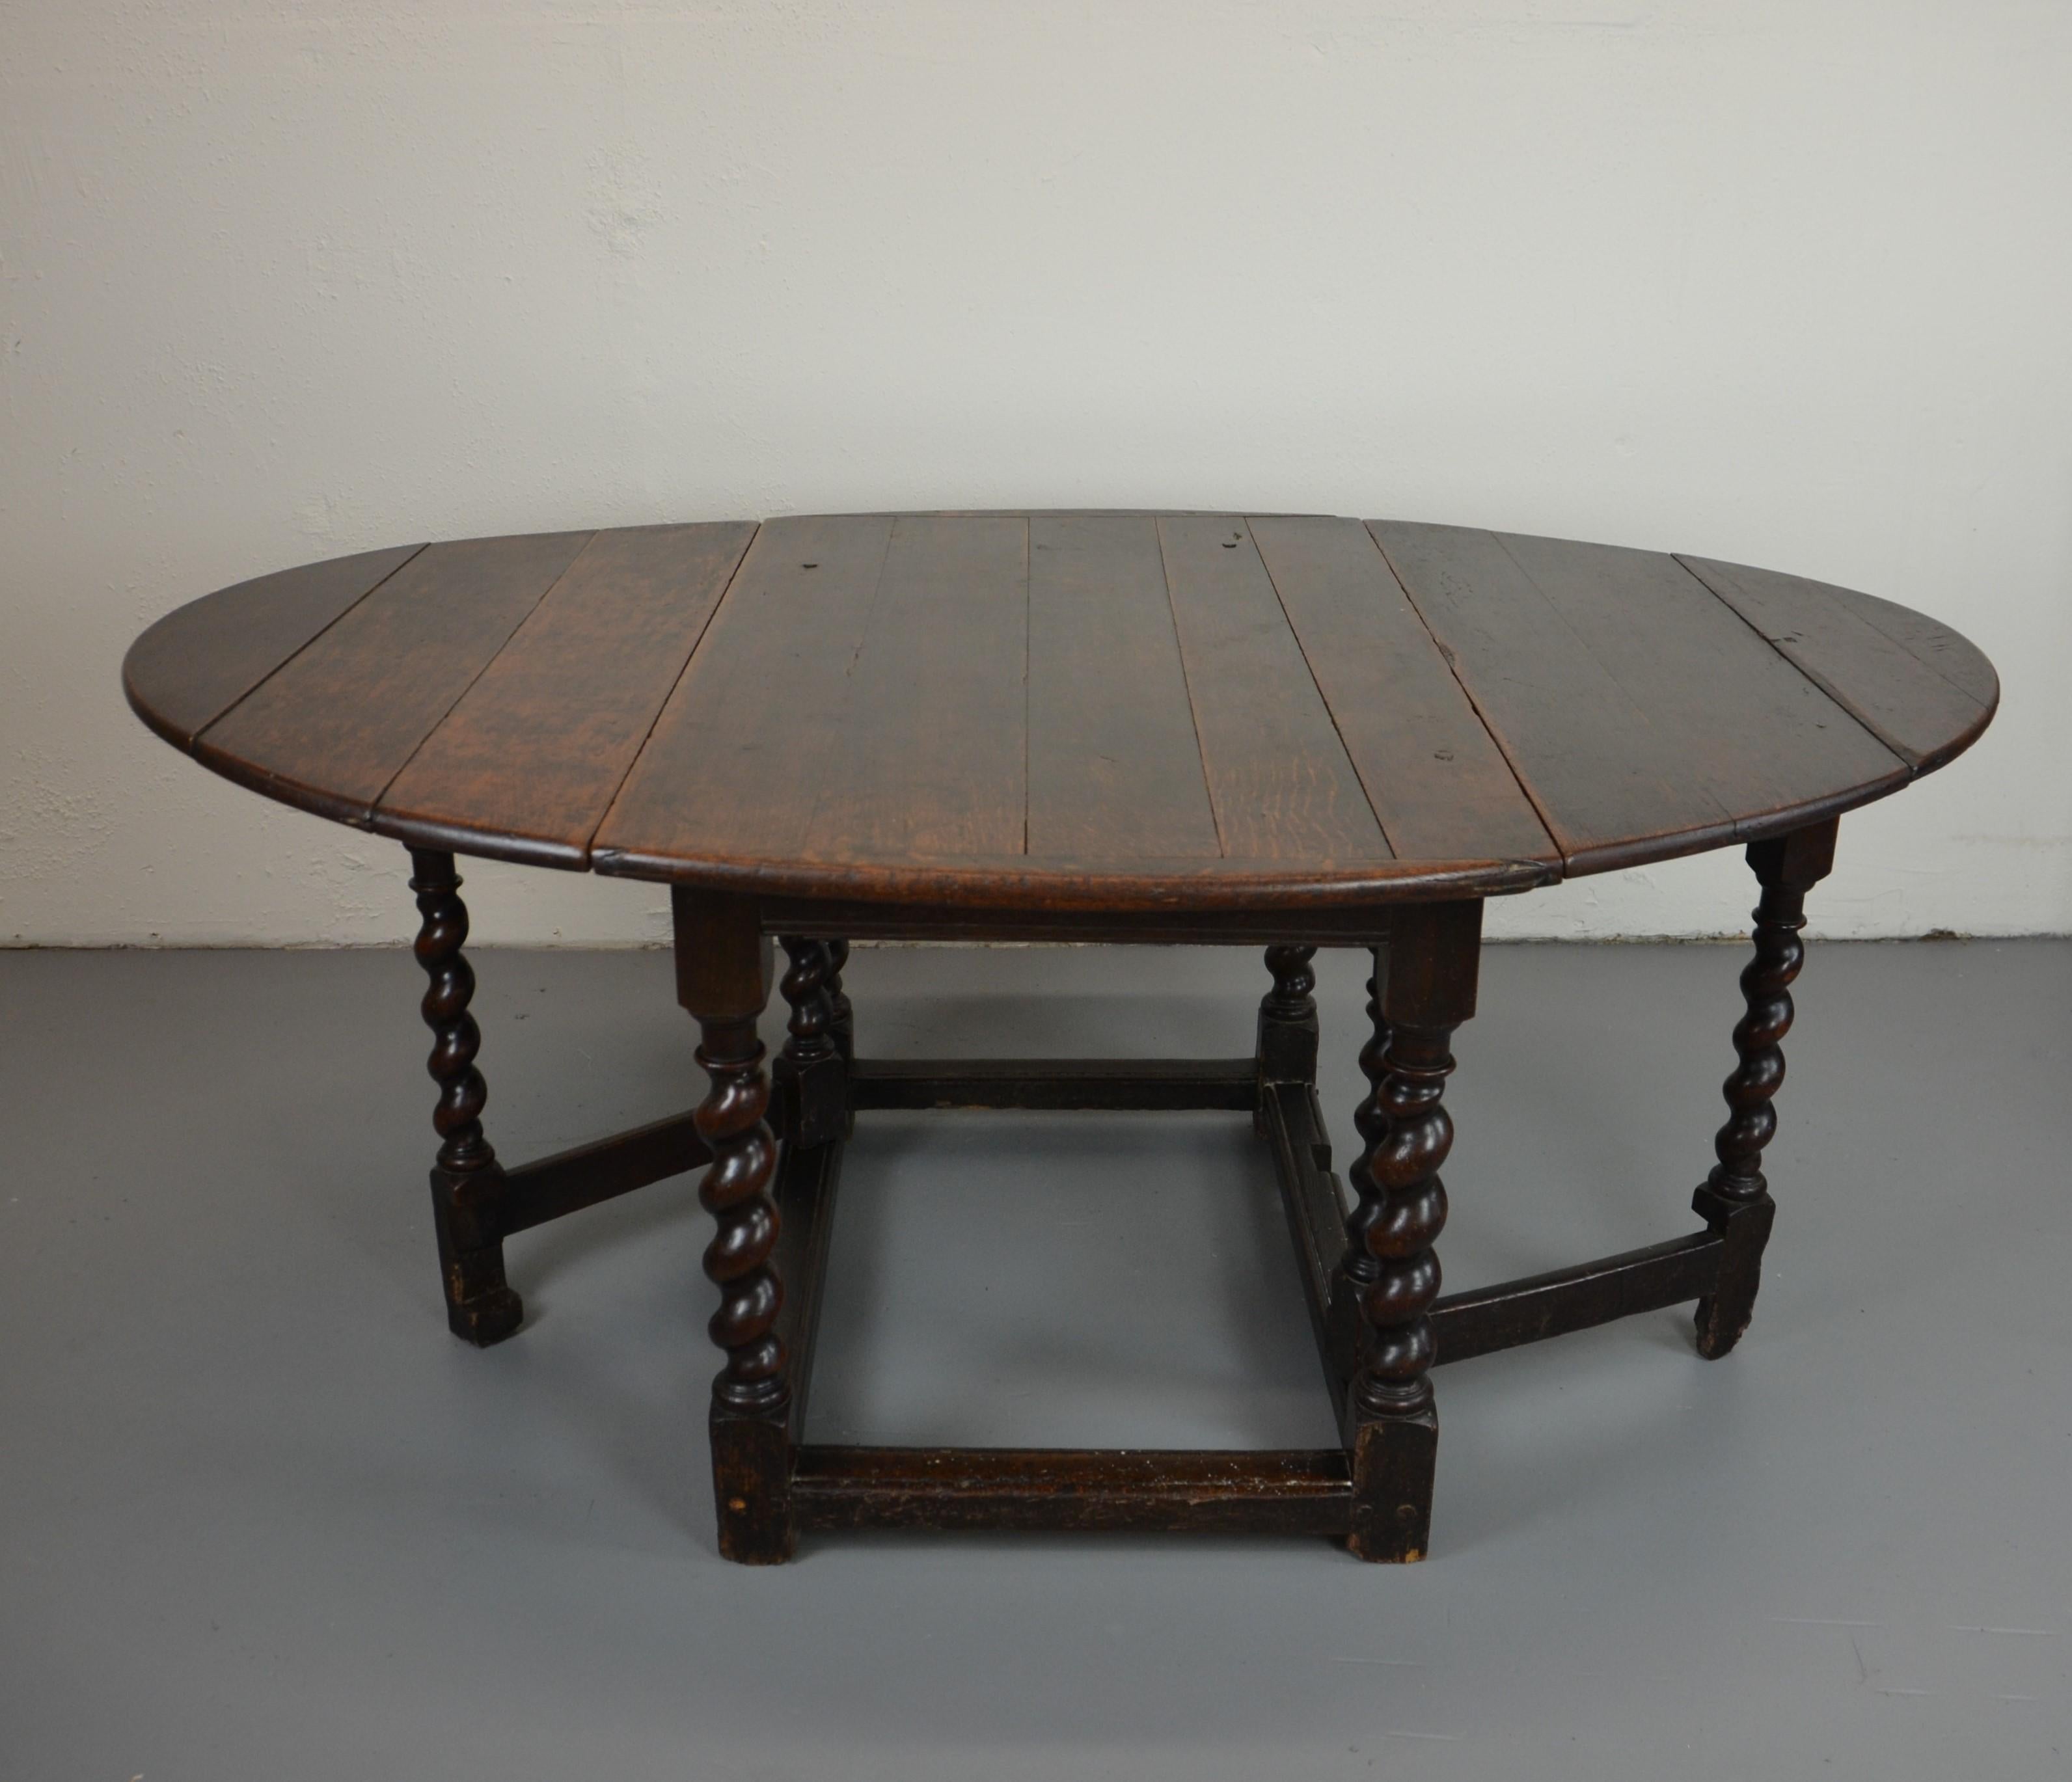 This is an original English solid oak gate-leg table from the late 17th century. Solid planks, early handmade ironwork hinges. Open 65